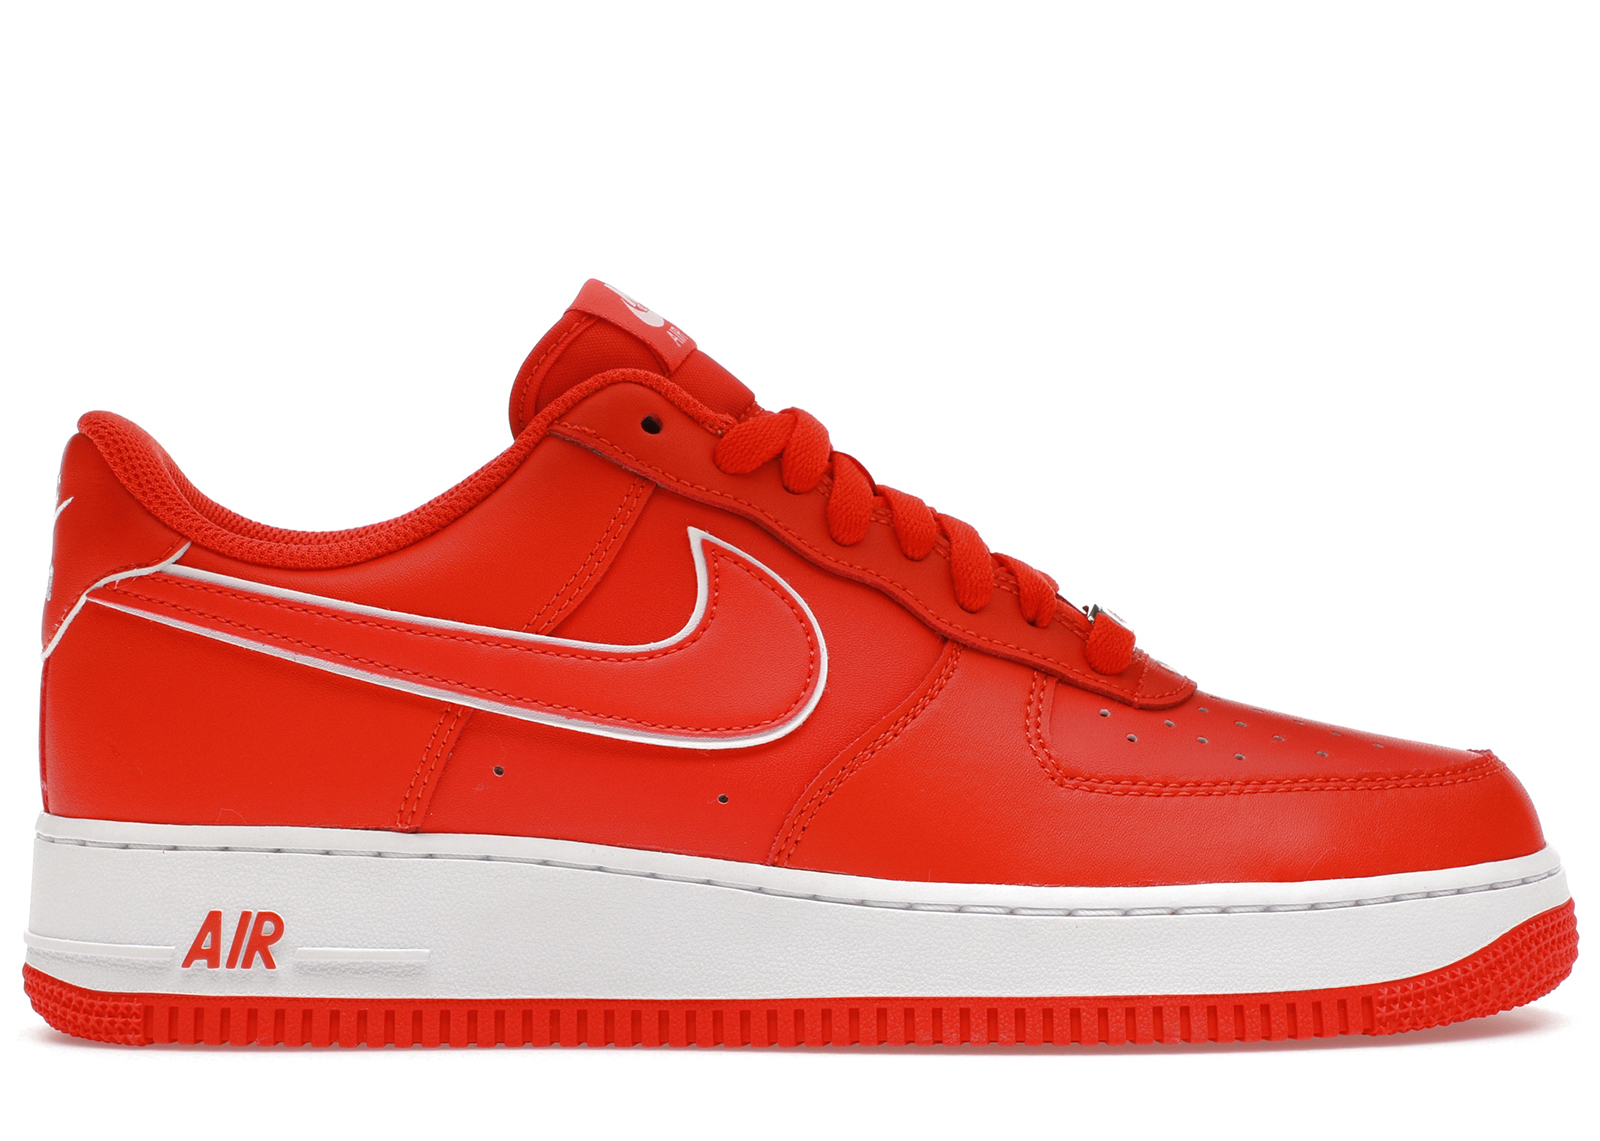 Nike Air Force 1 Low 07 Picante Red White メンズ - DV0788-600 - JP